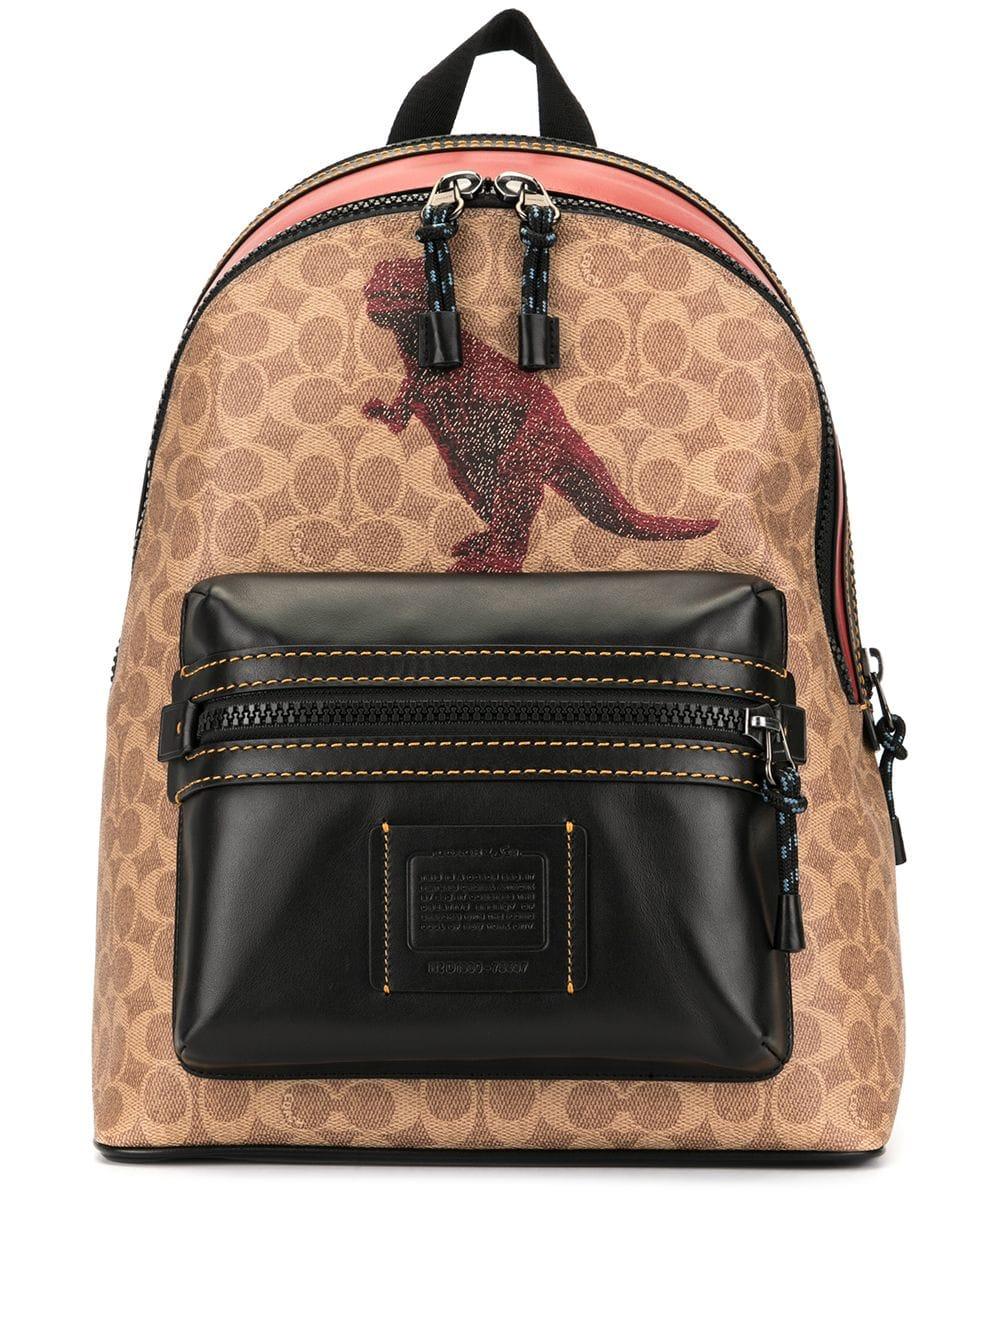 coach backpack dinosaur > Purchase - 62%